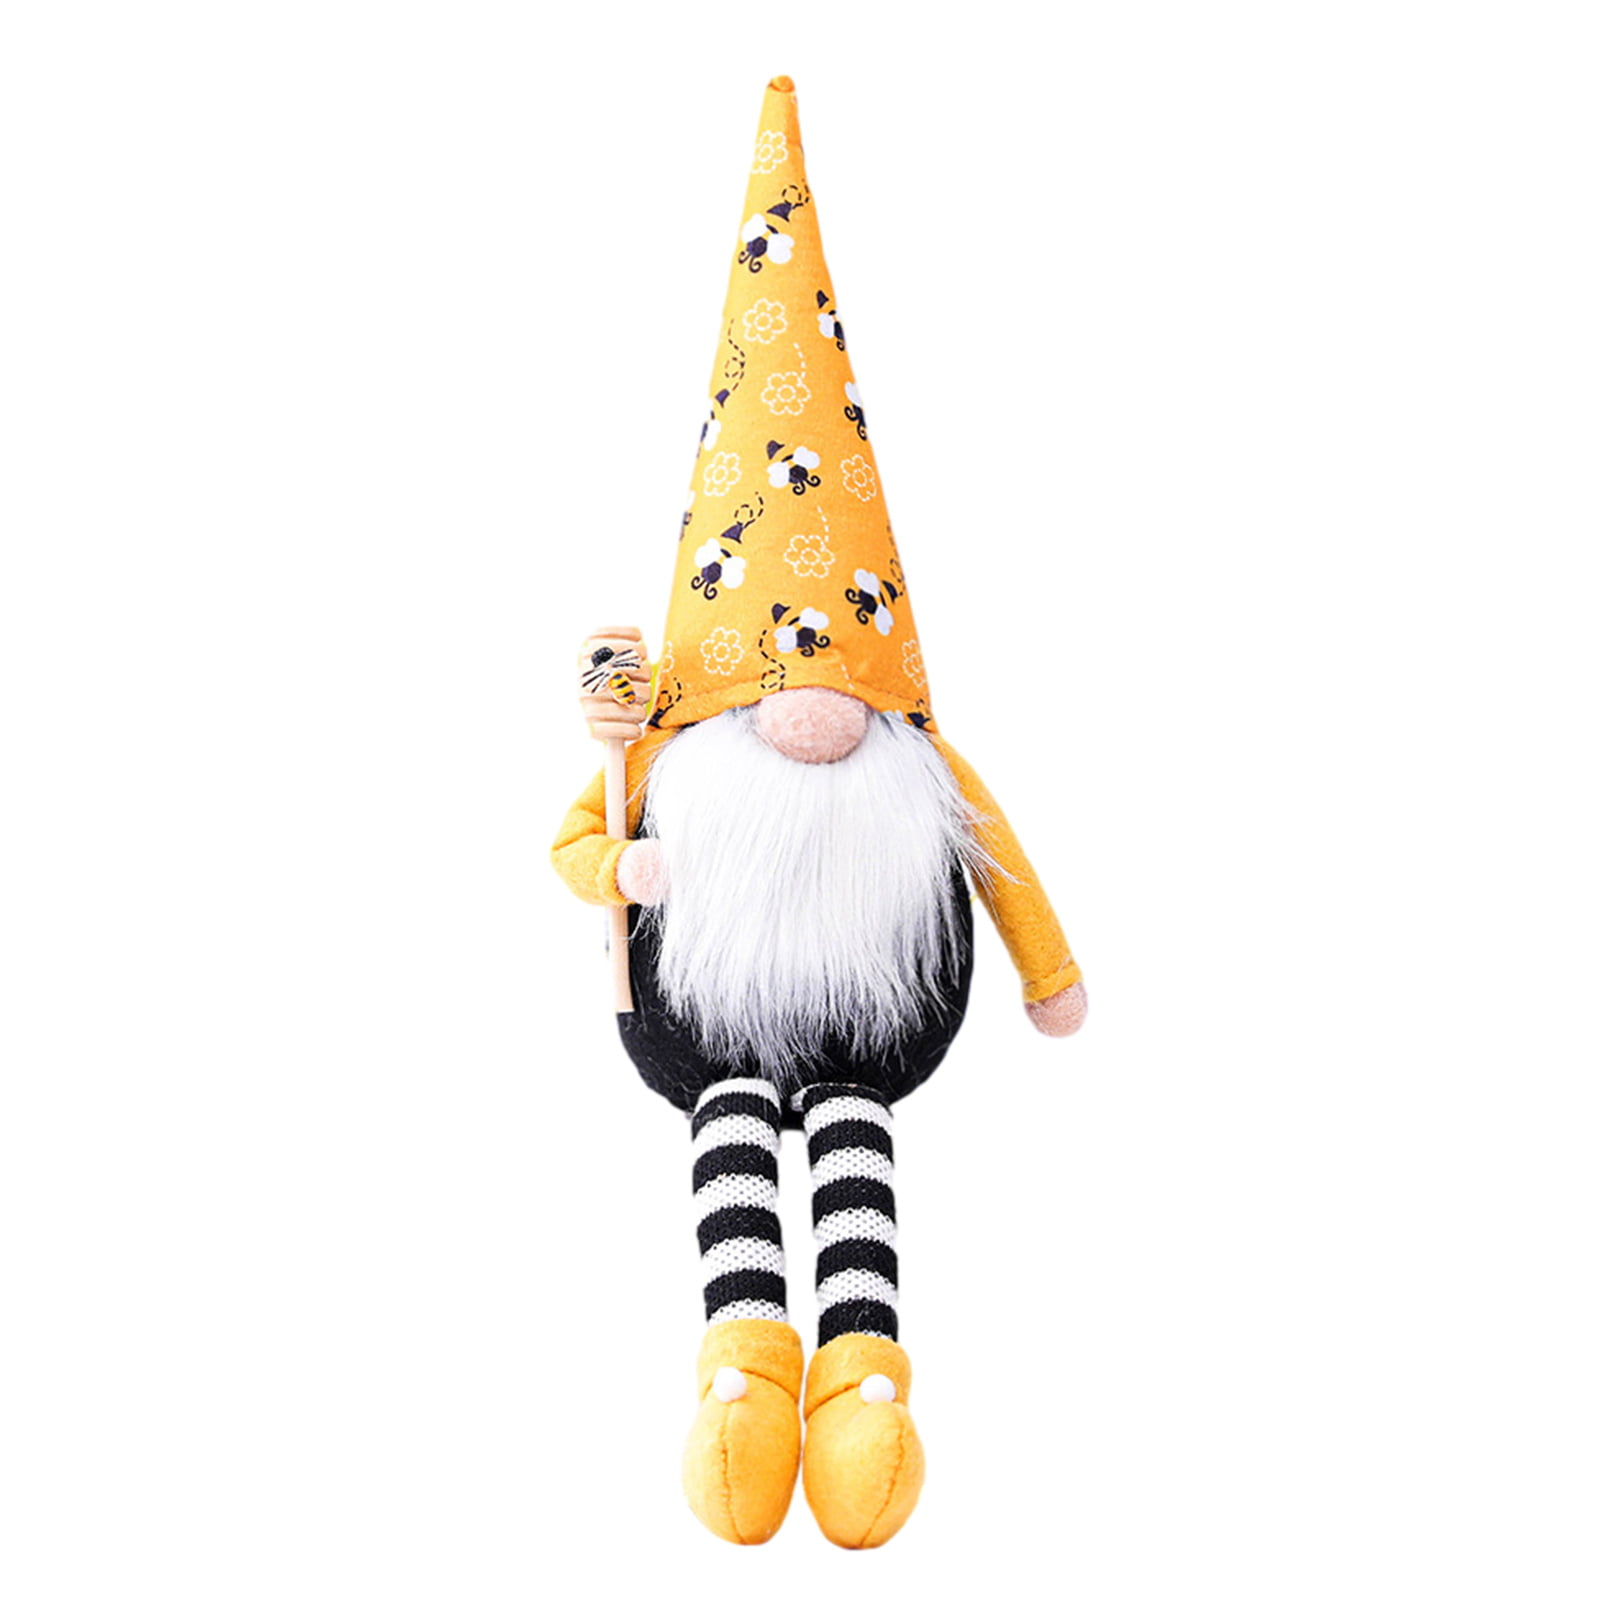 Details about   Honeybee Festival Plush Gnome Swedish Tomte with Dangling Legs 